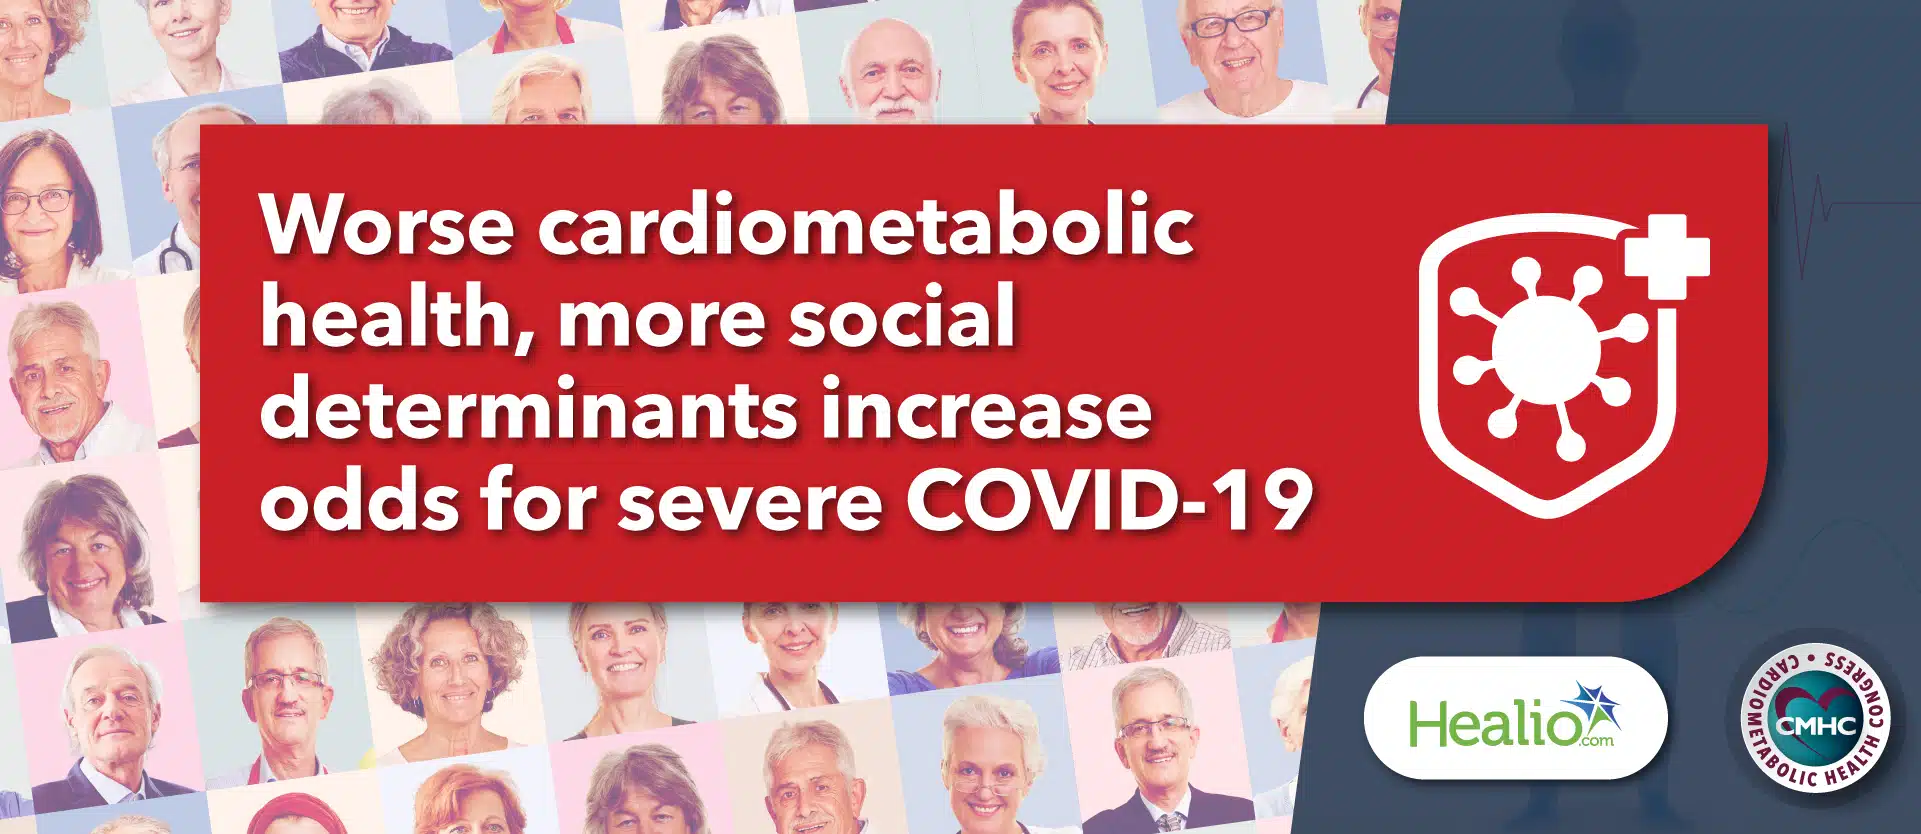 Worse cardiometabolic health increases the risk for severe COVID-19 outcomes